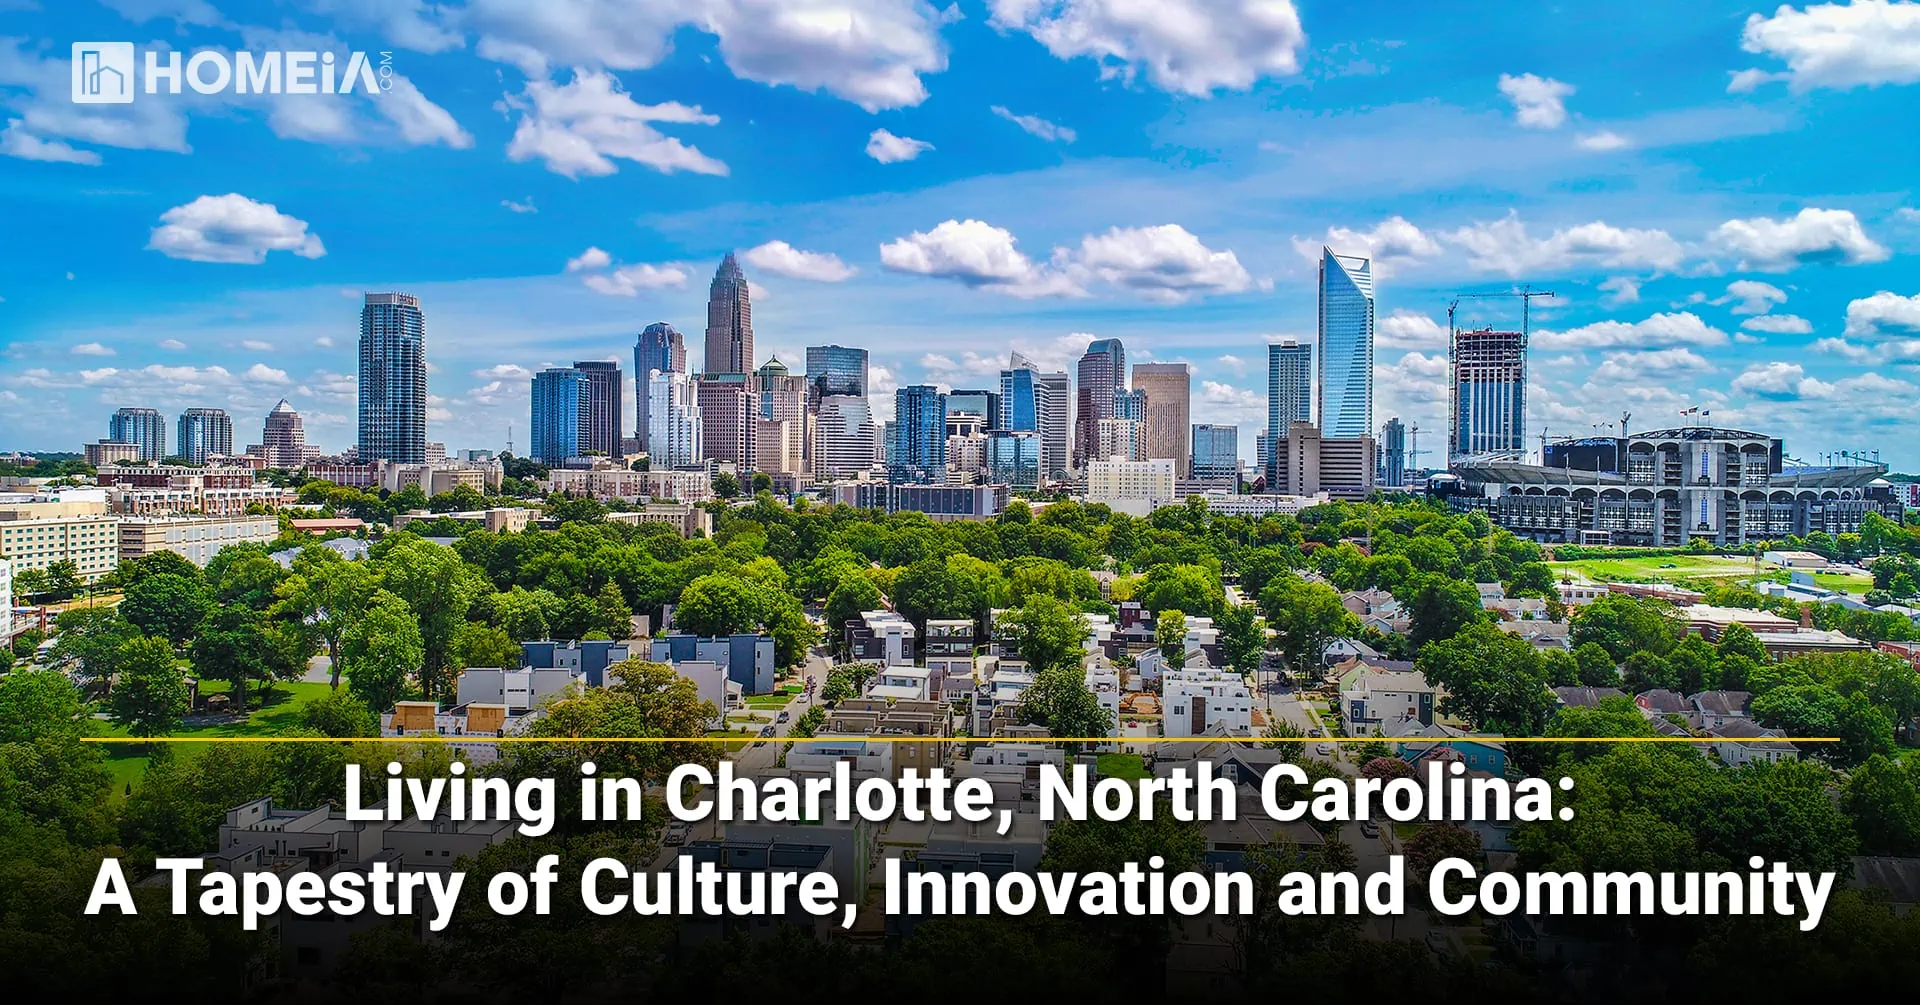 Living in Charlotte, North Carolina: A Tapestry of Culture, Innovation and Community